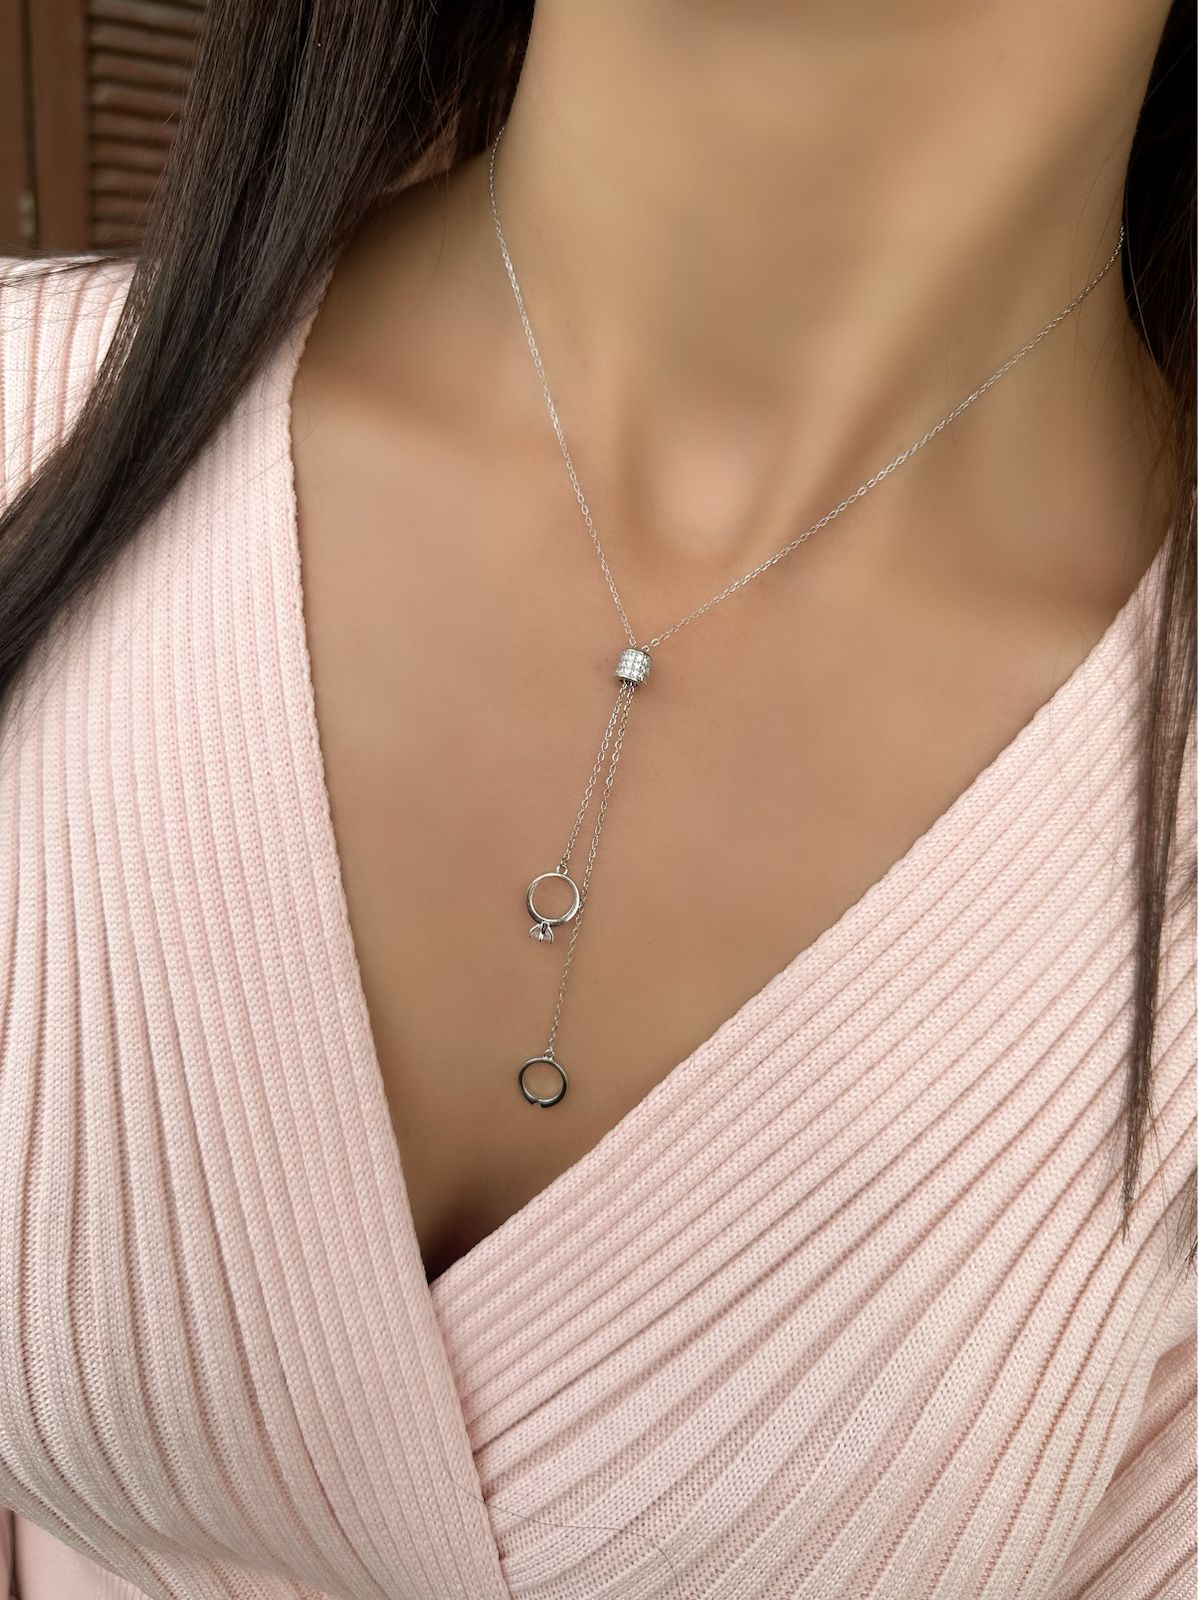 Necklace With Promise Ring Pendant